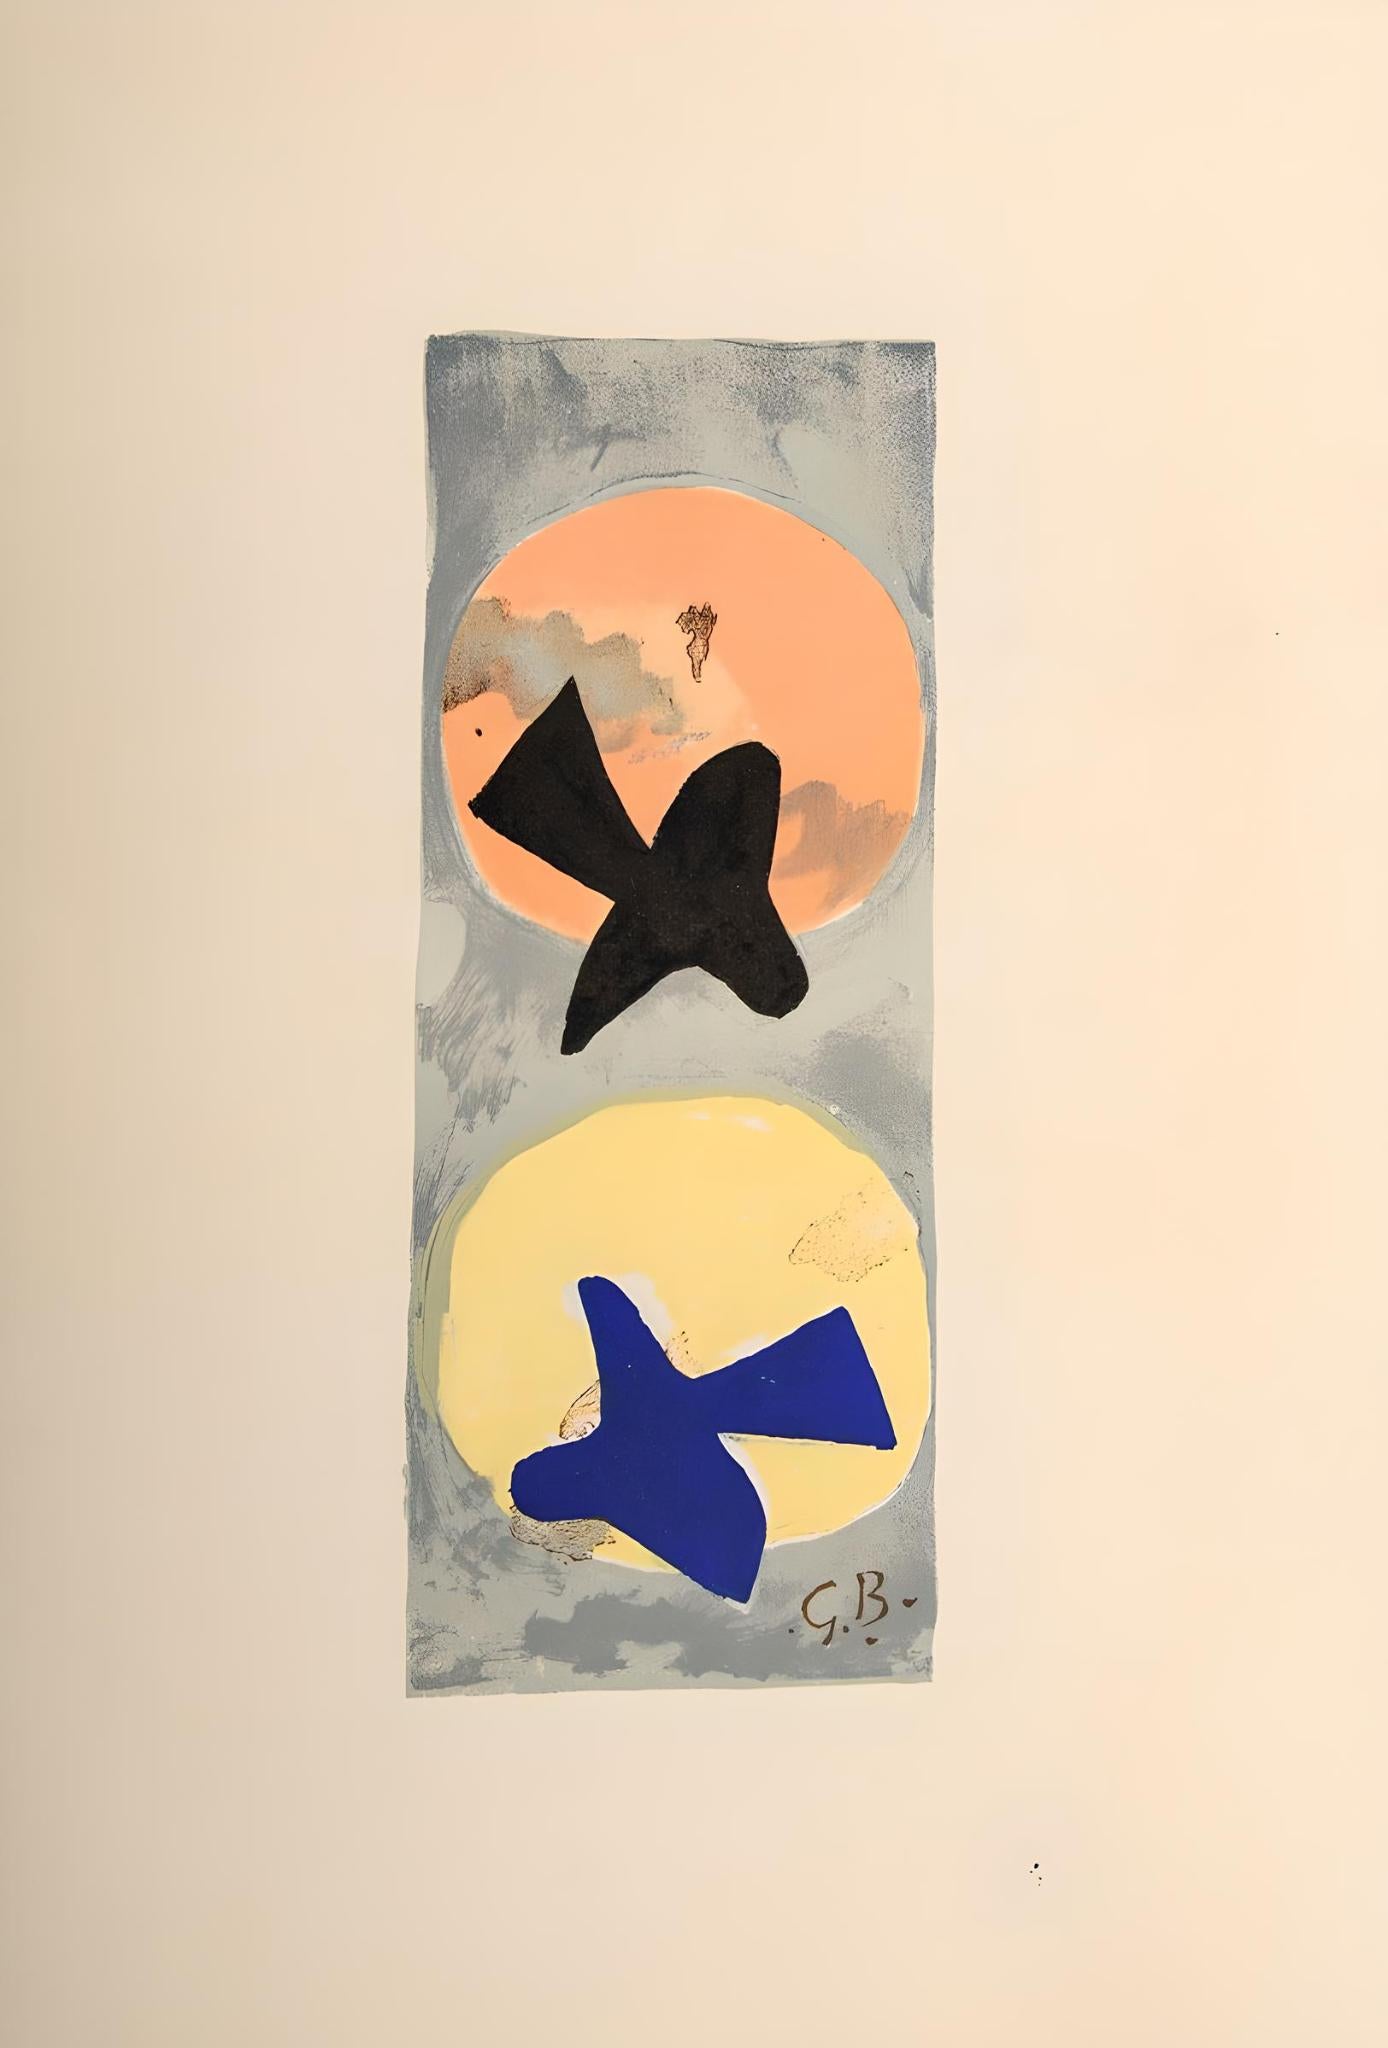 Lithograph on wove paper. Inscription: Signed in the plate and unnumbered; text on verso, as issued. Good Condition. Notes: From Derrière le miroir, N° 115, published by Derrière le miroir, Paris; printed by Galerie Maeght, Paris, 1959. Excerpted